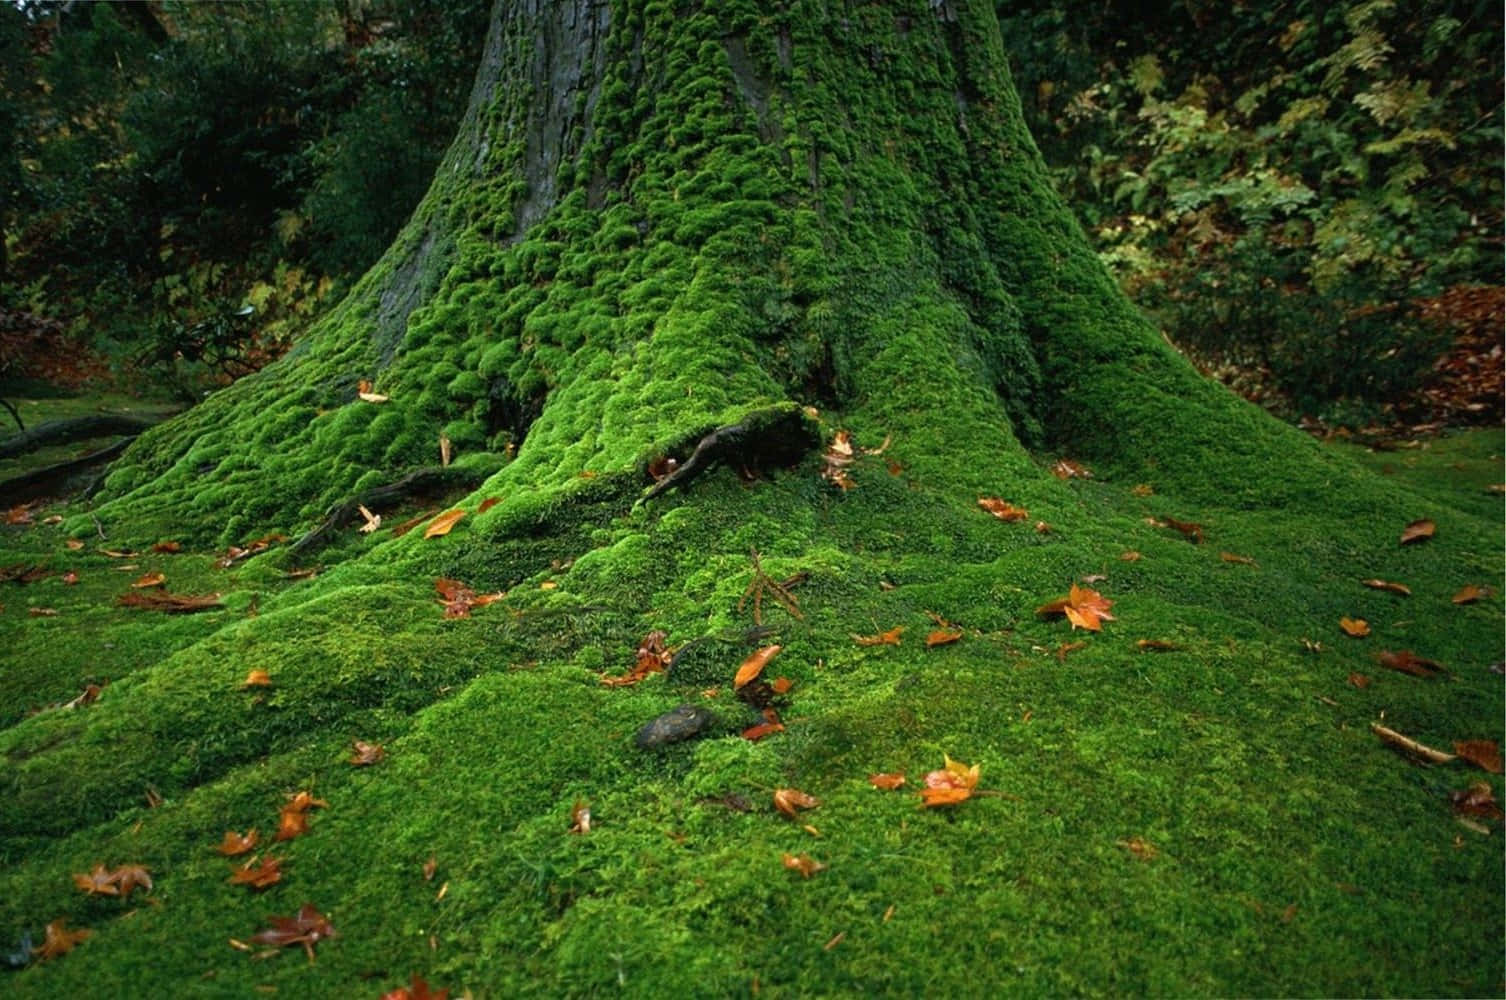 Experiencing Joyful Nature - One Person Sitting in the Middle of a Mossy Landscape